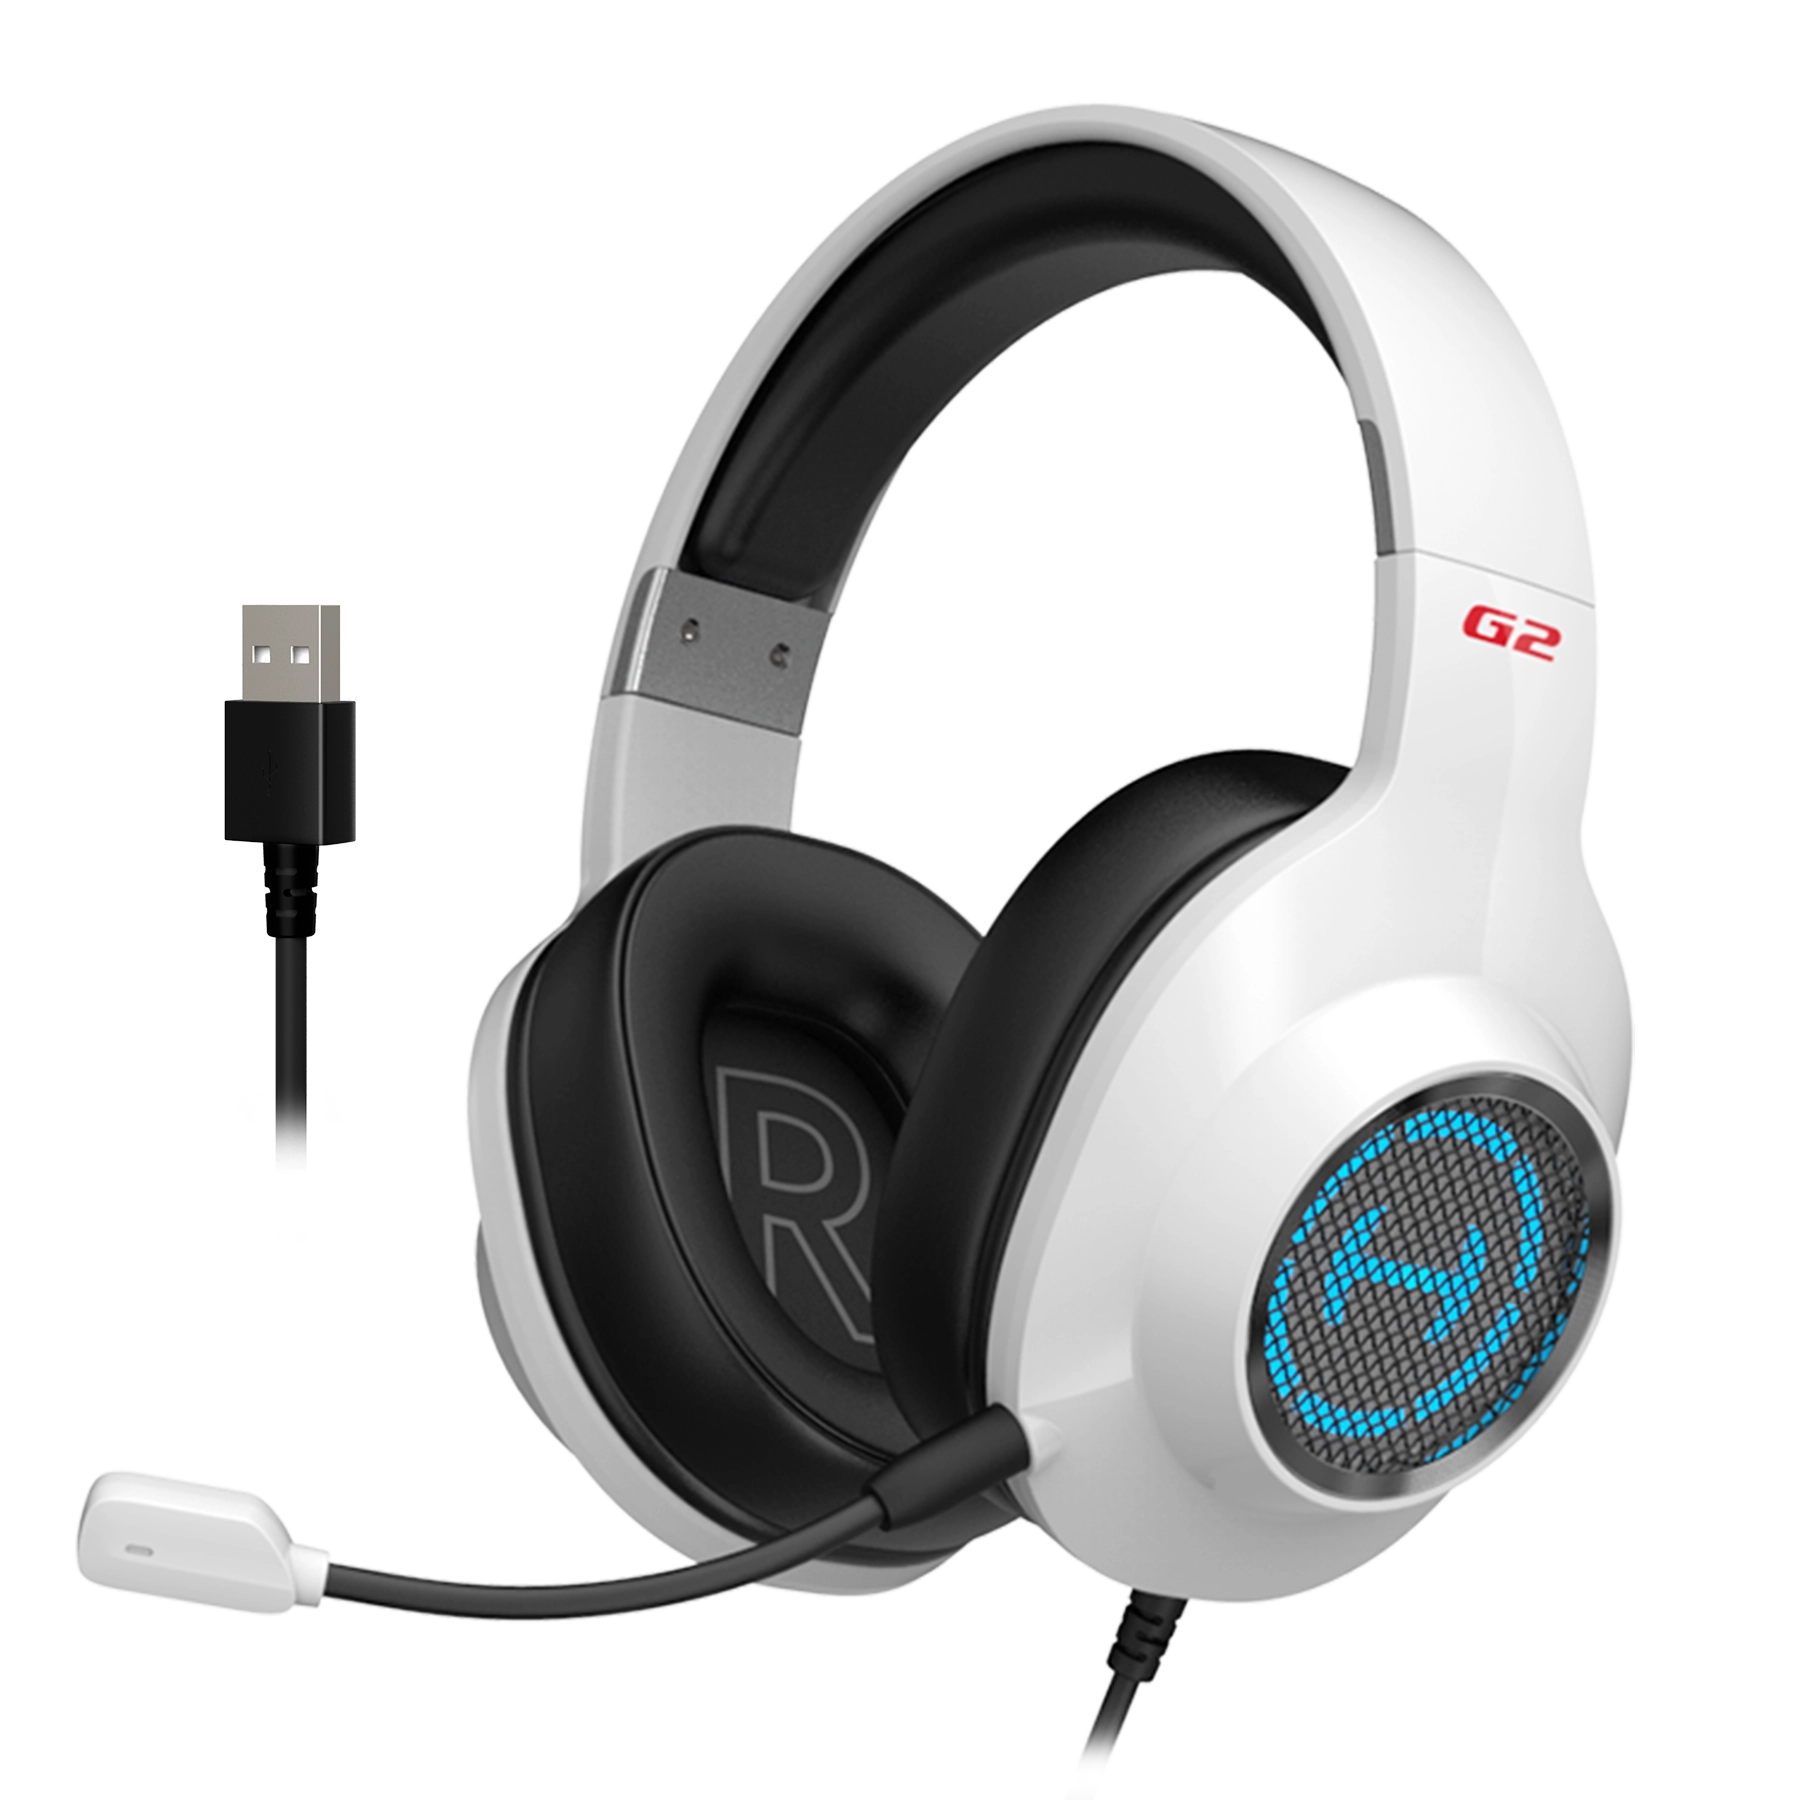 g2Ⅱ_headset product pictures white_